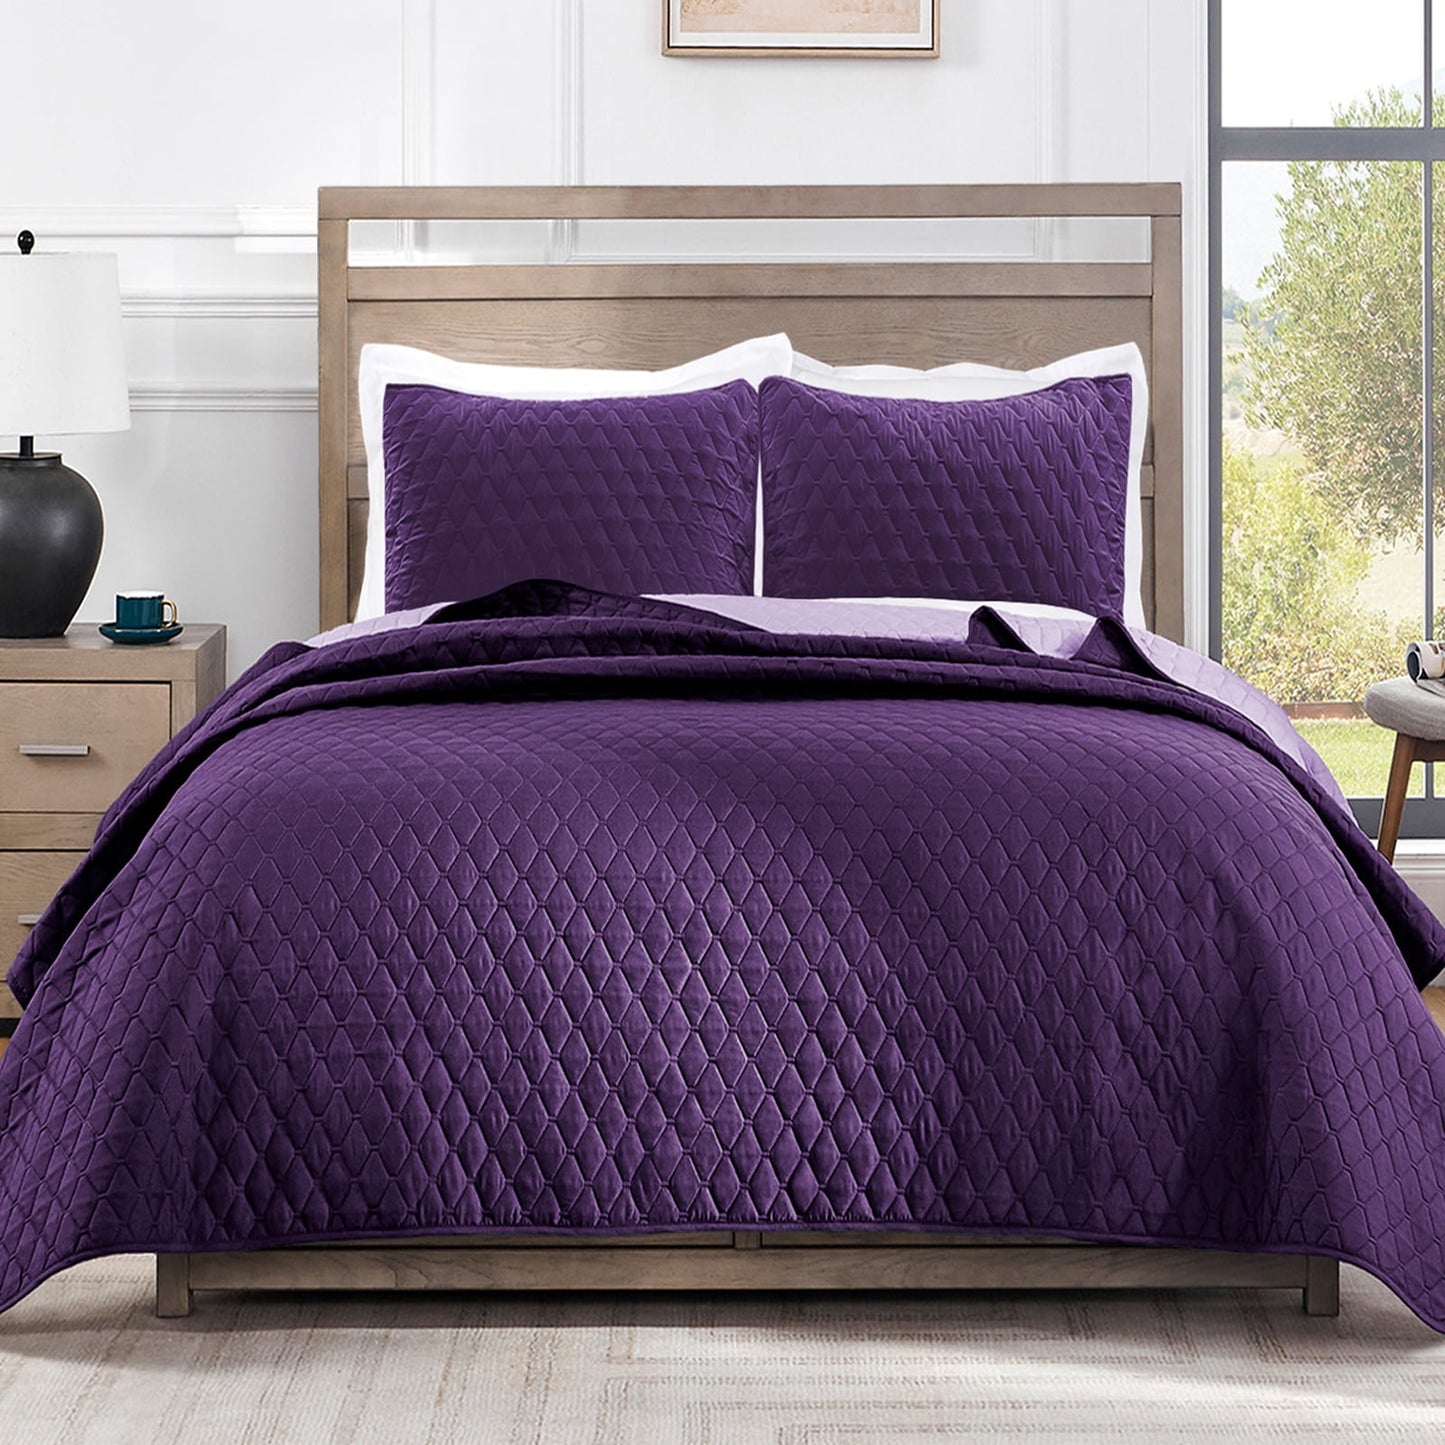 Exclusivo Mezcla Ultrasonic Reversible Twin Quilt Bedding Set with Pillow Sham, Lightweight Quilts Twin Size, Soft Bedspreads Bed Coverlets for All Seasons - (Deep Purple, 68"x88")